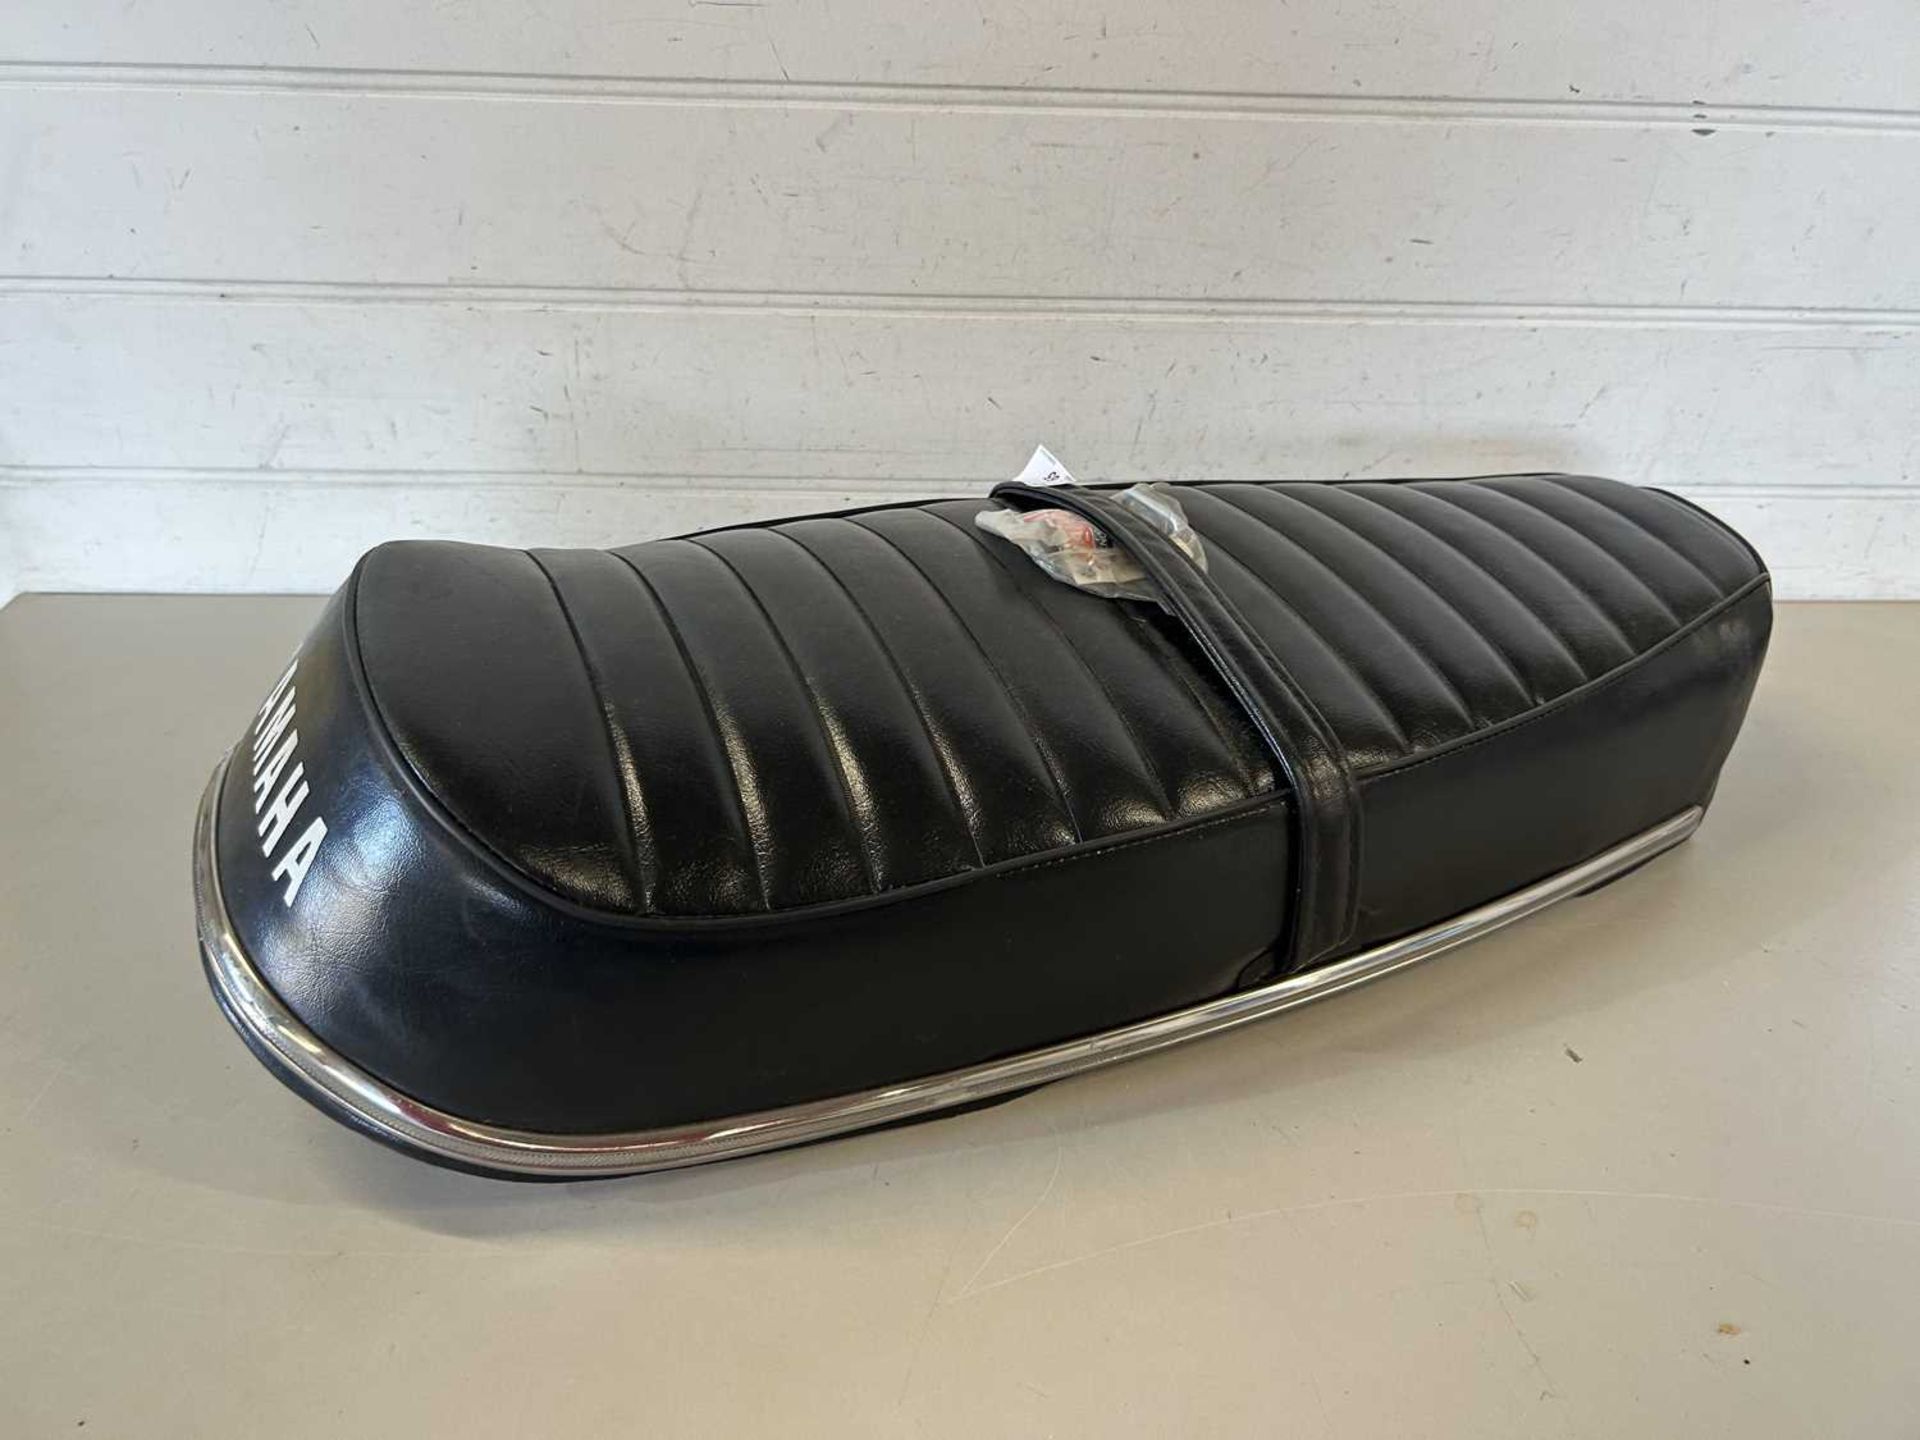 Yamaha R5 motorcycle seat complete with cover